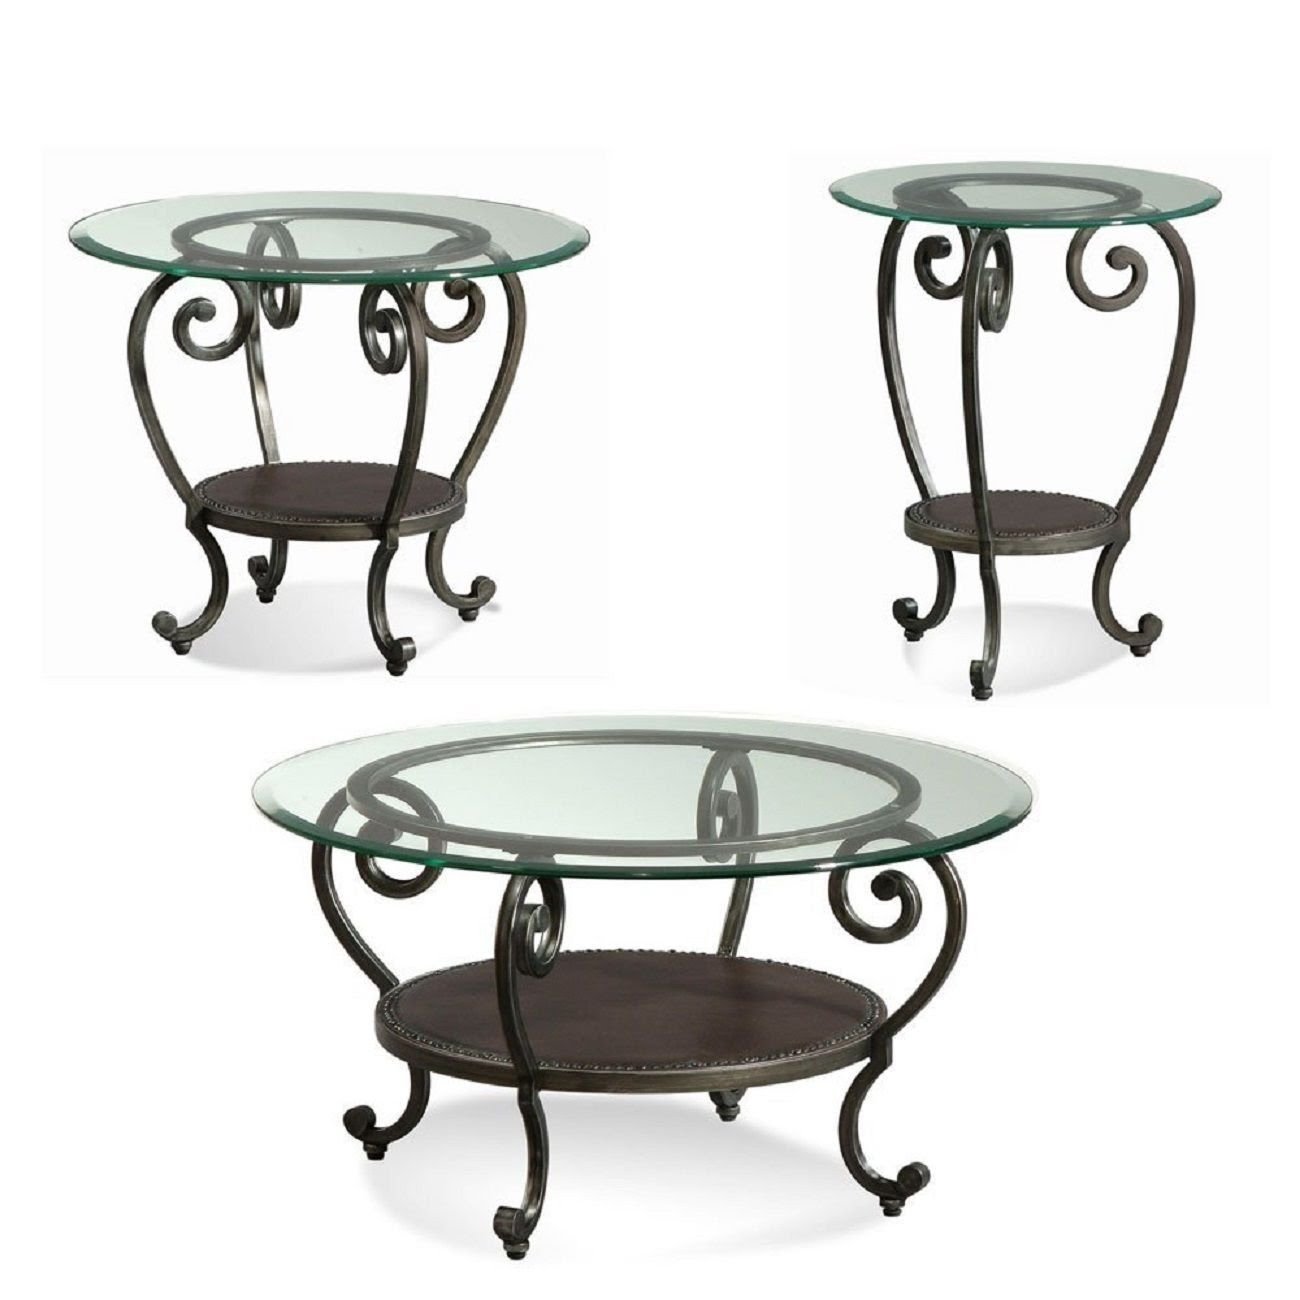 Wrought Iron Coffee Table Youll Love In 2021 Visualhunt